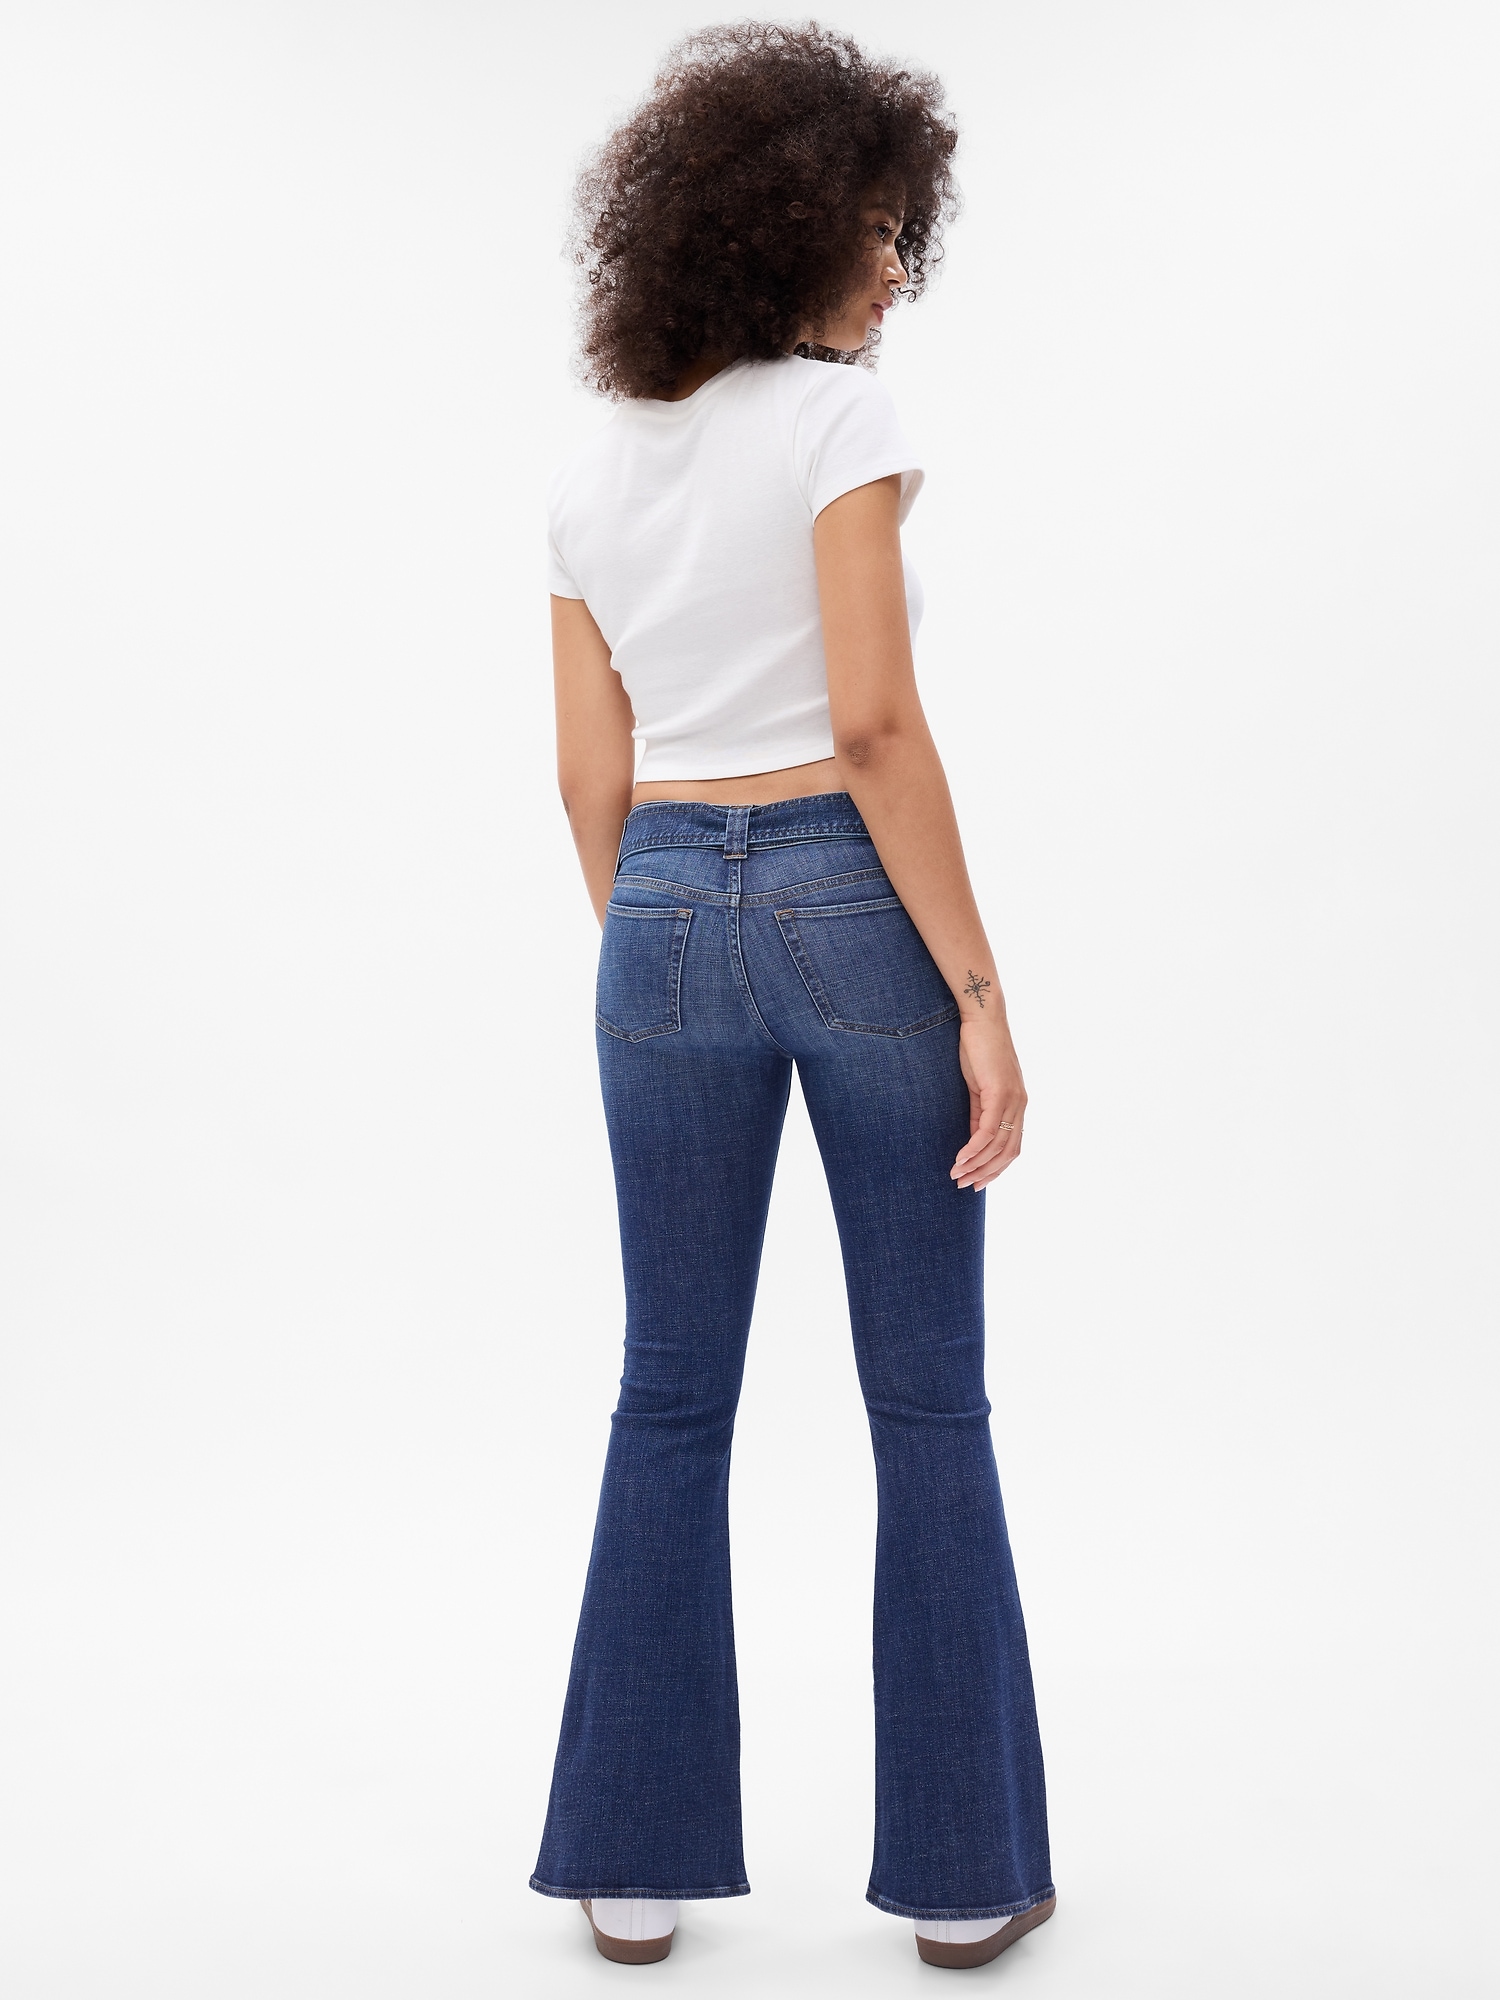 90s Y2K Low Rise Fit and Flare Jeans/ US 0/ Pants 